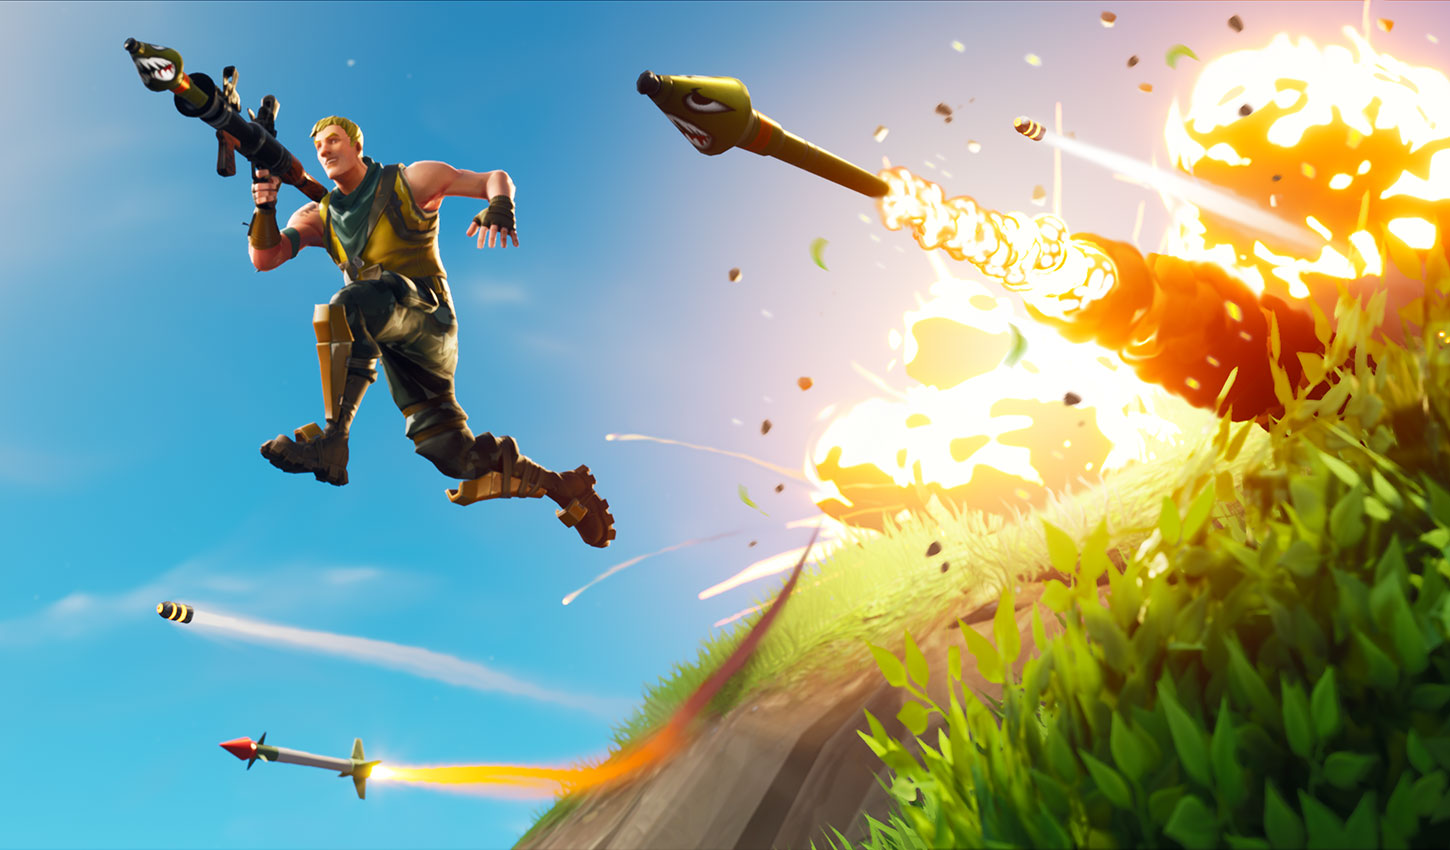 fortnite expands to android but epic skirts google play store with custom installer macrumors - fortnite client side editing